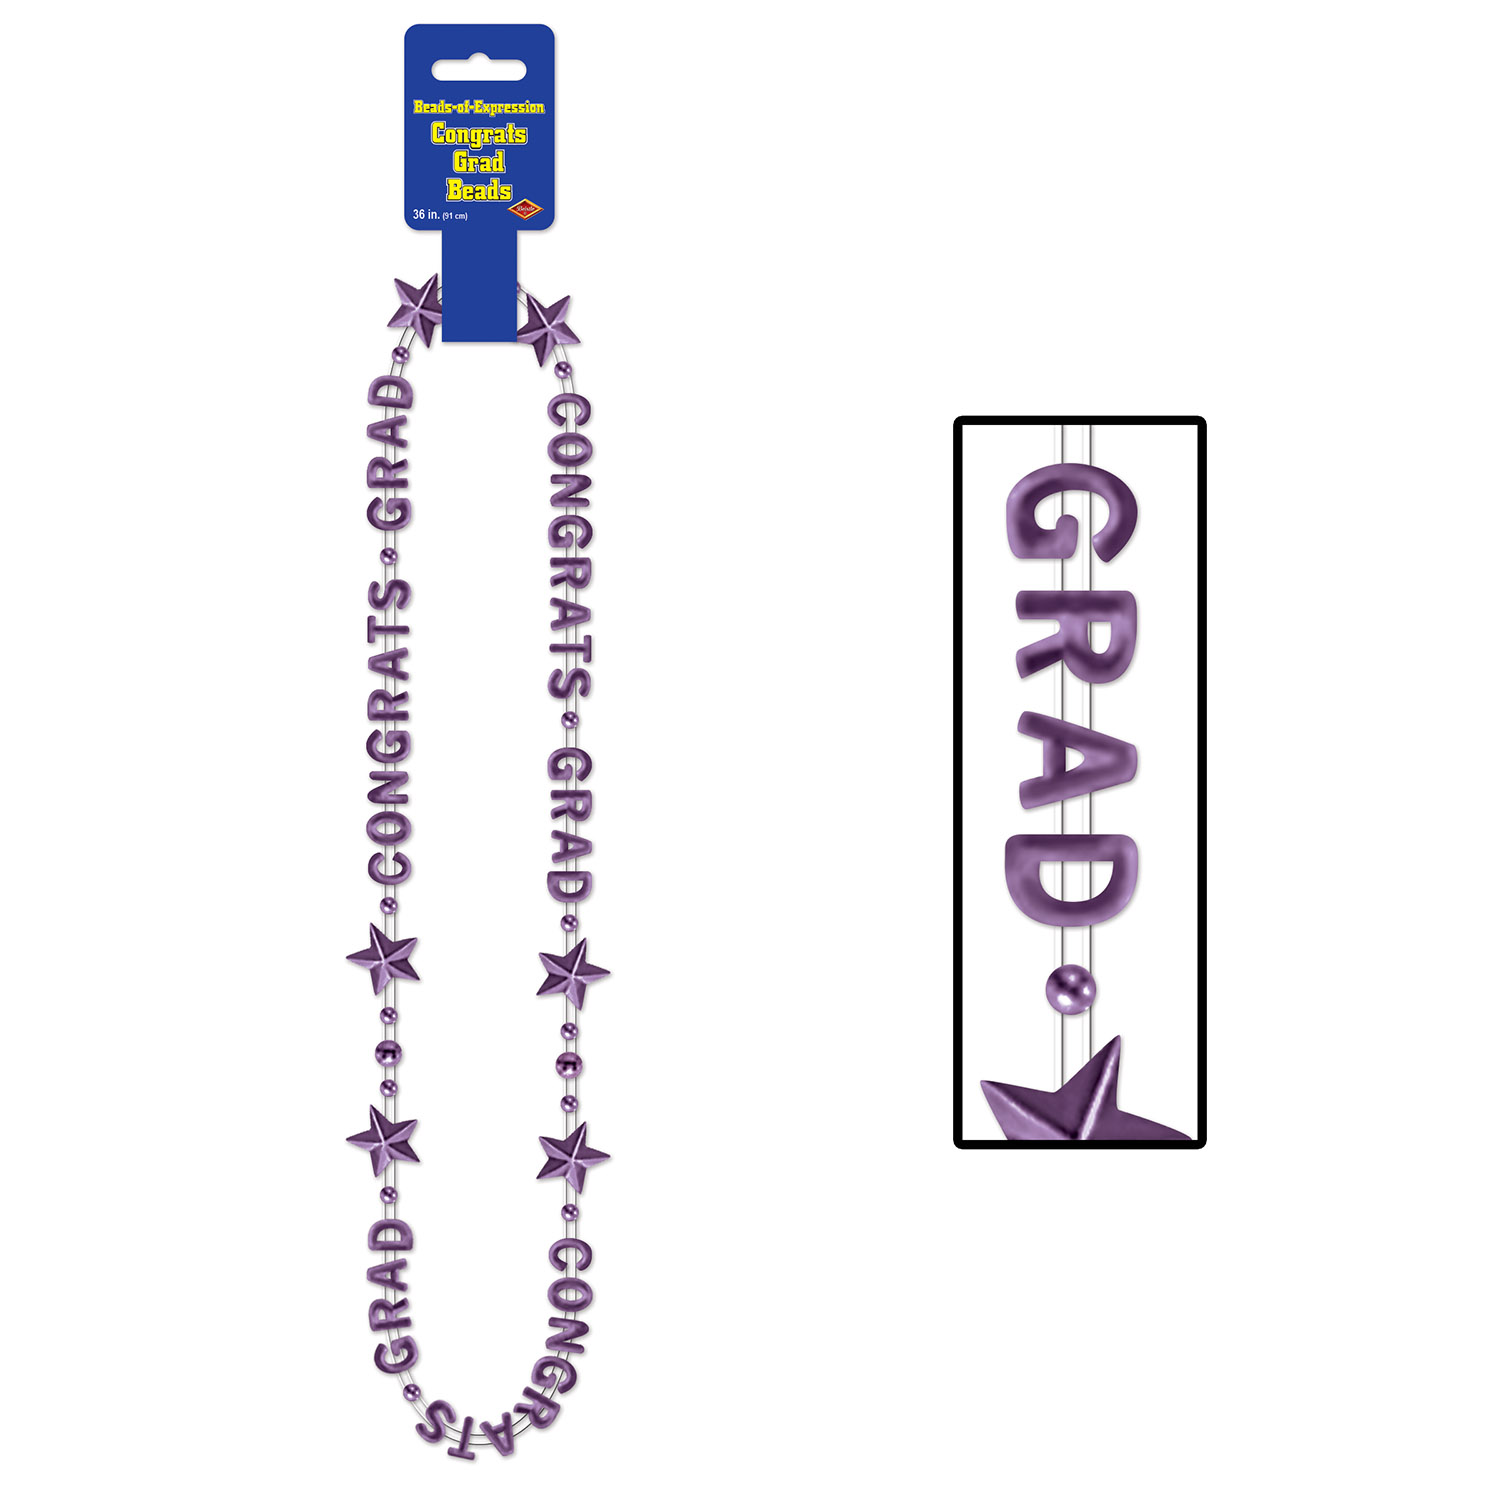 Congrats Grad BEADS-Of-Expression